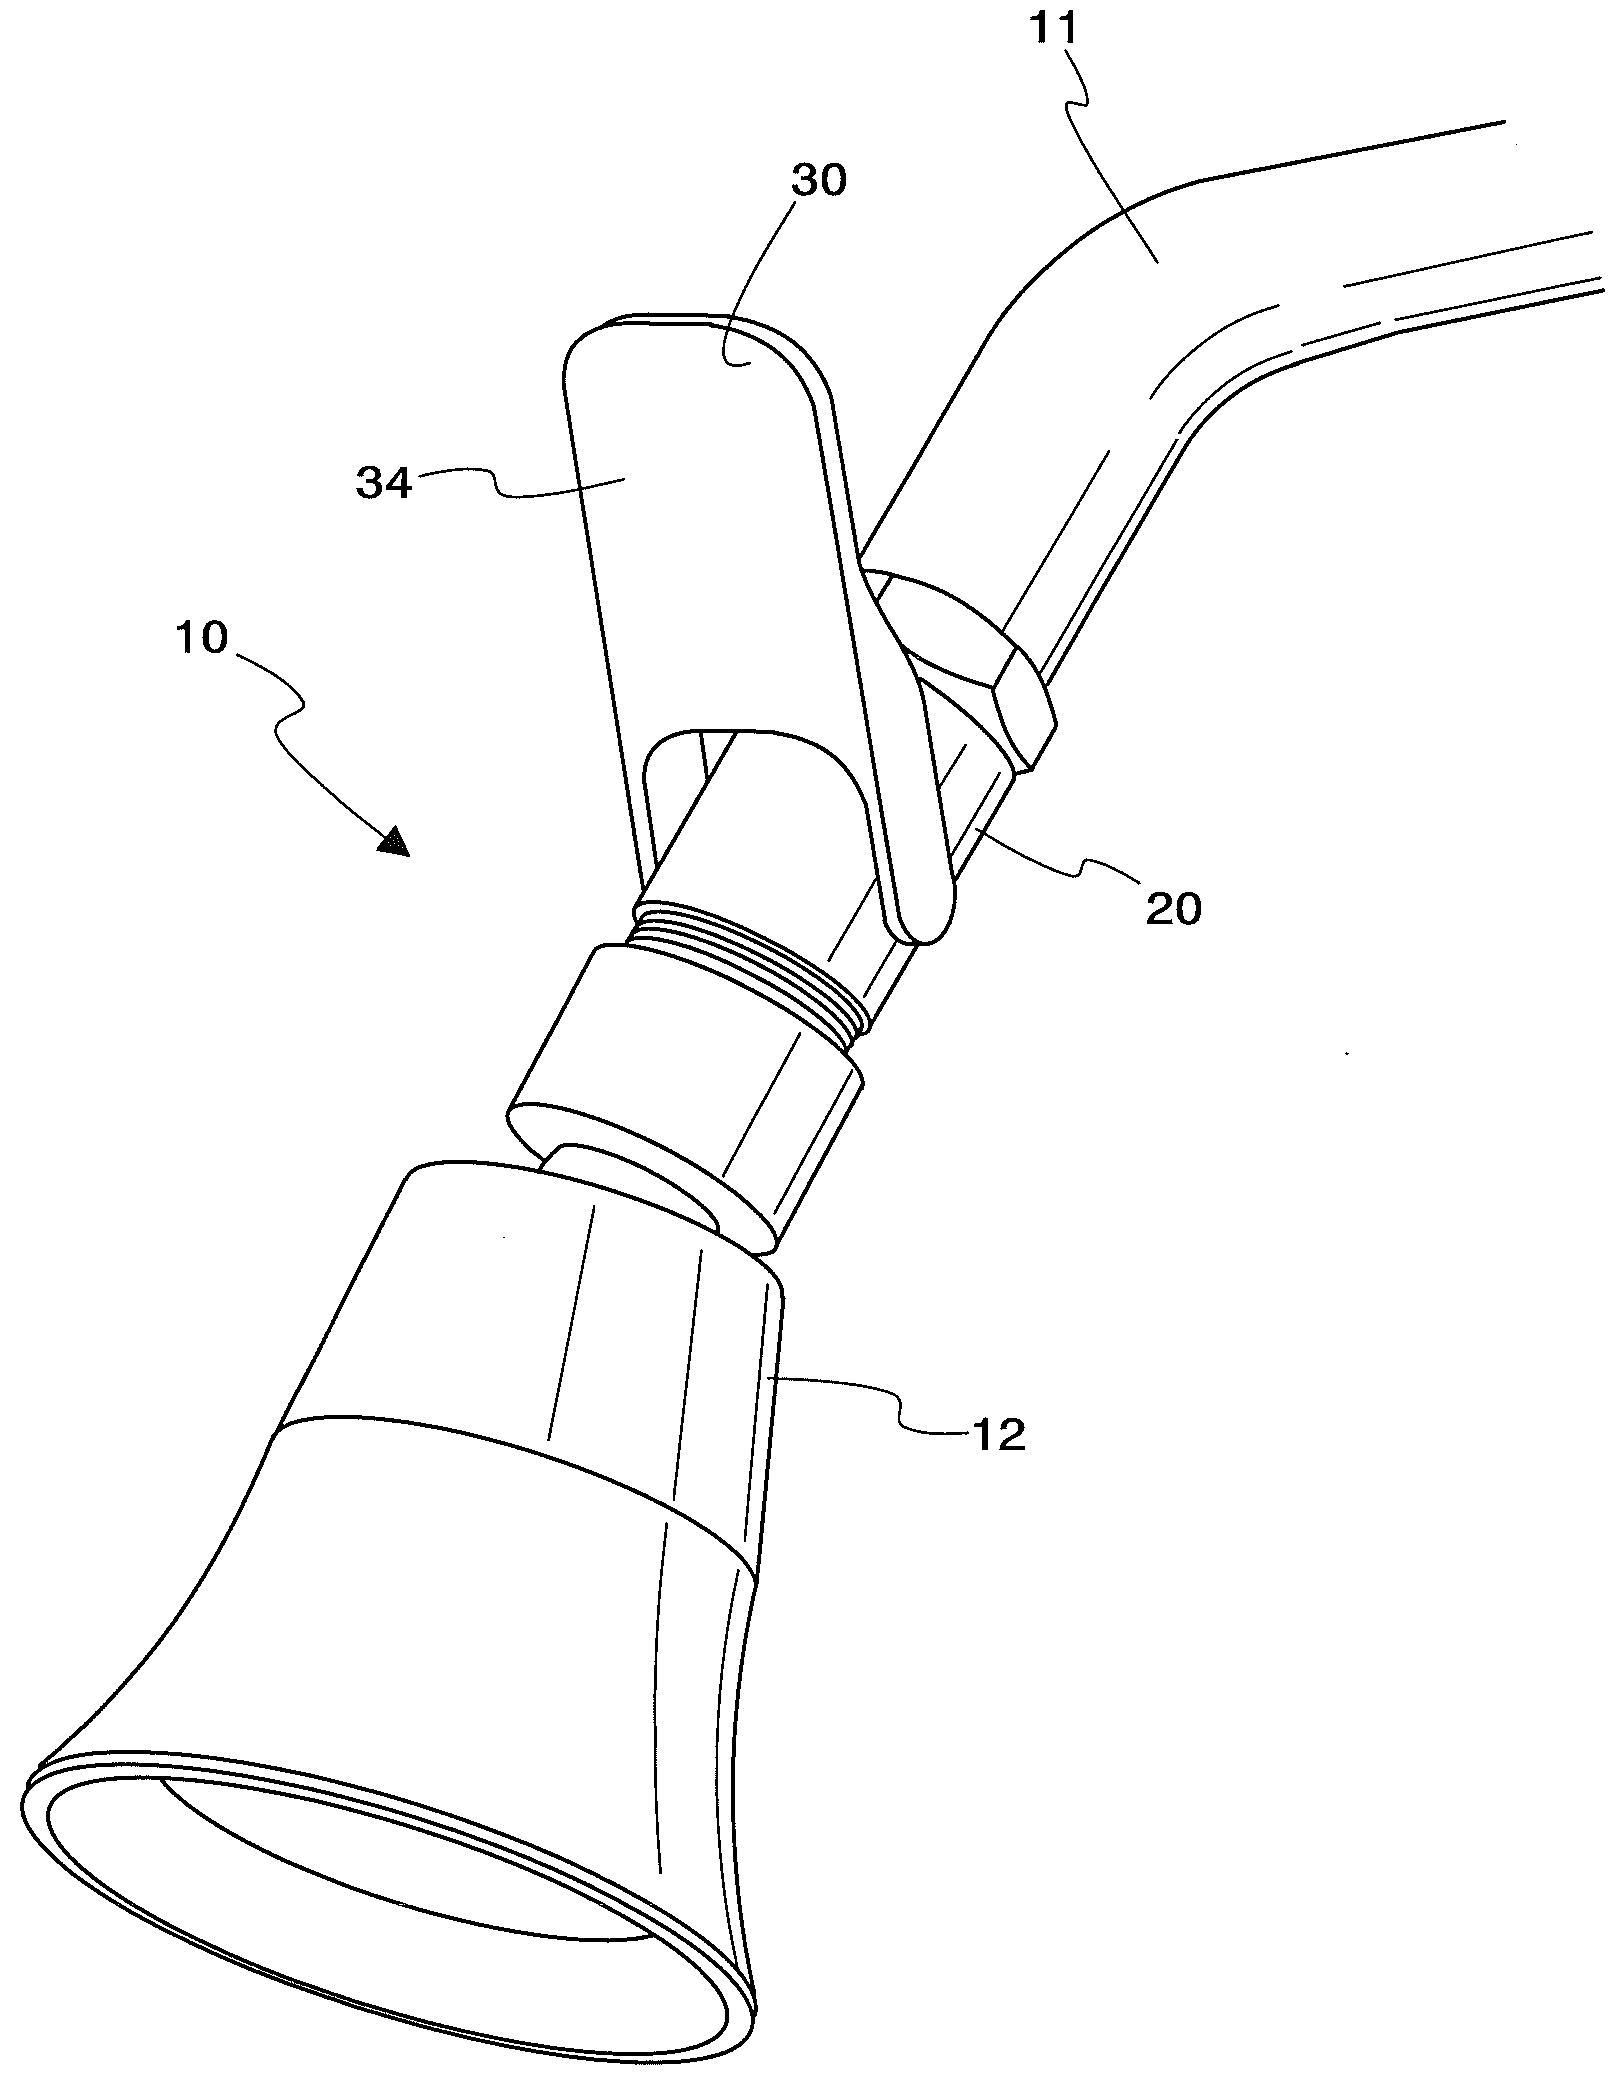 Water flow control device